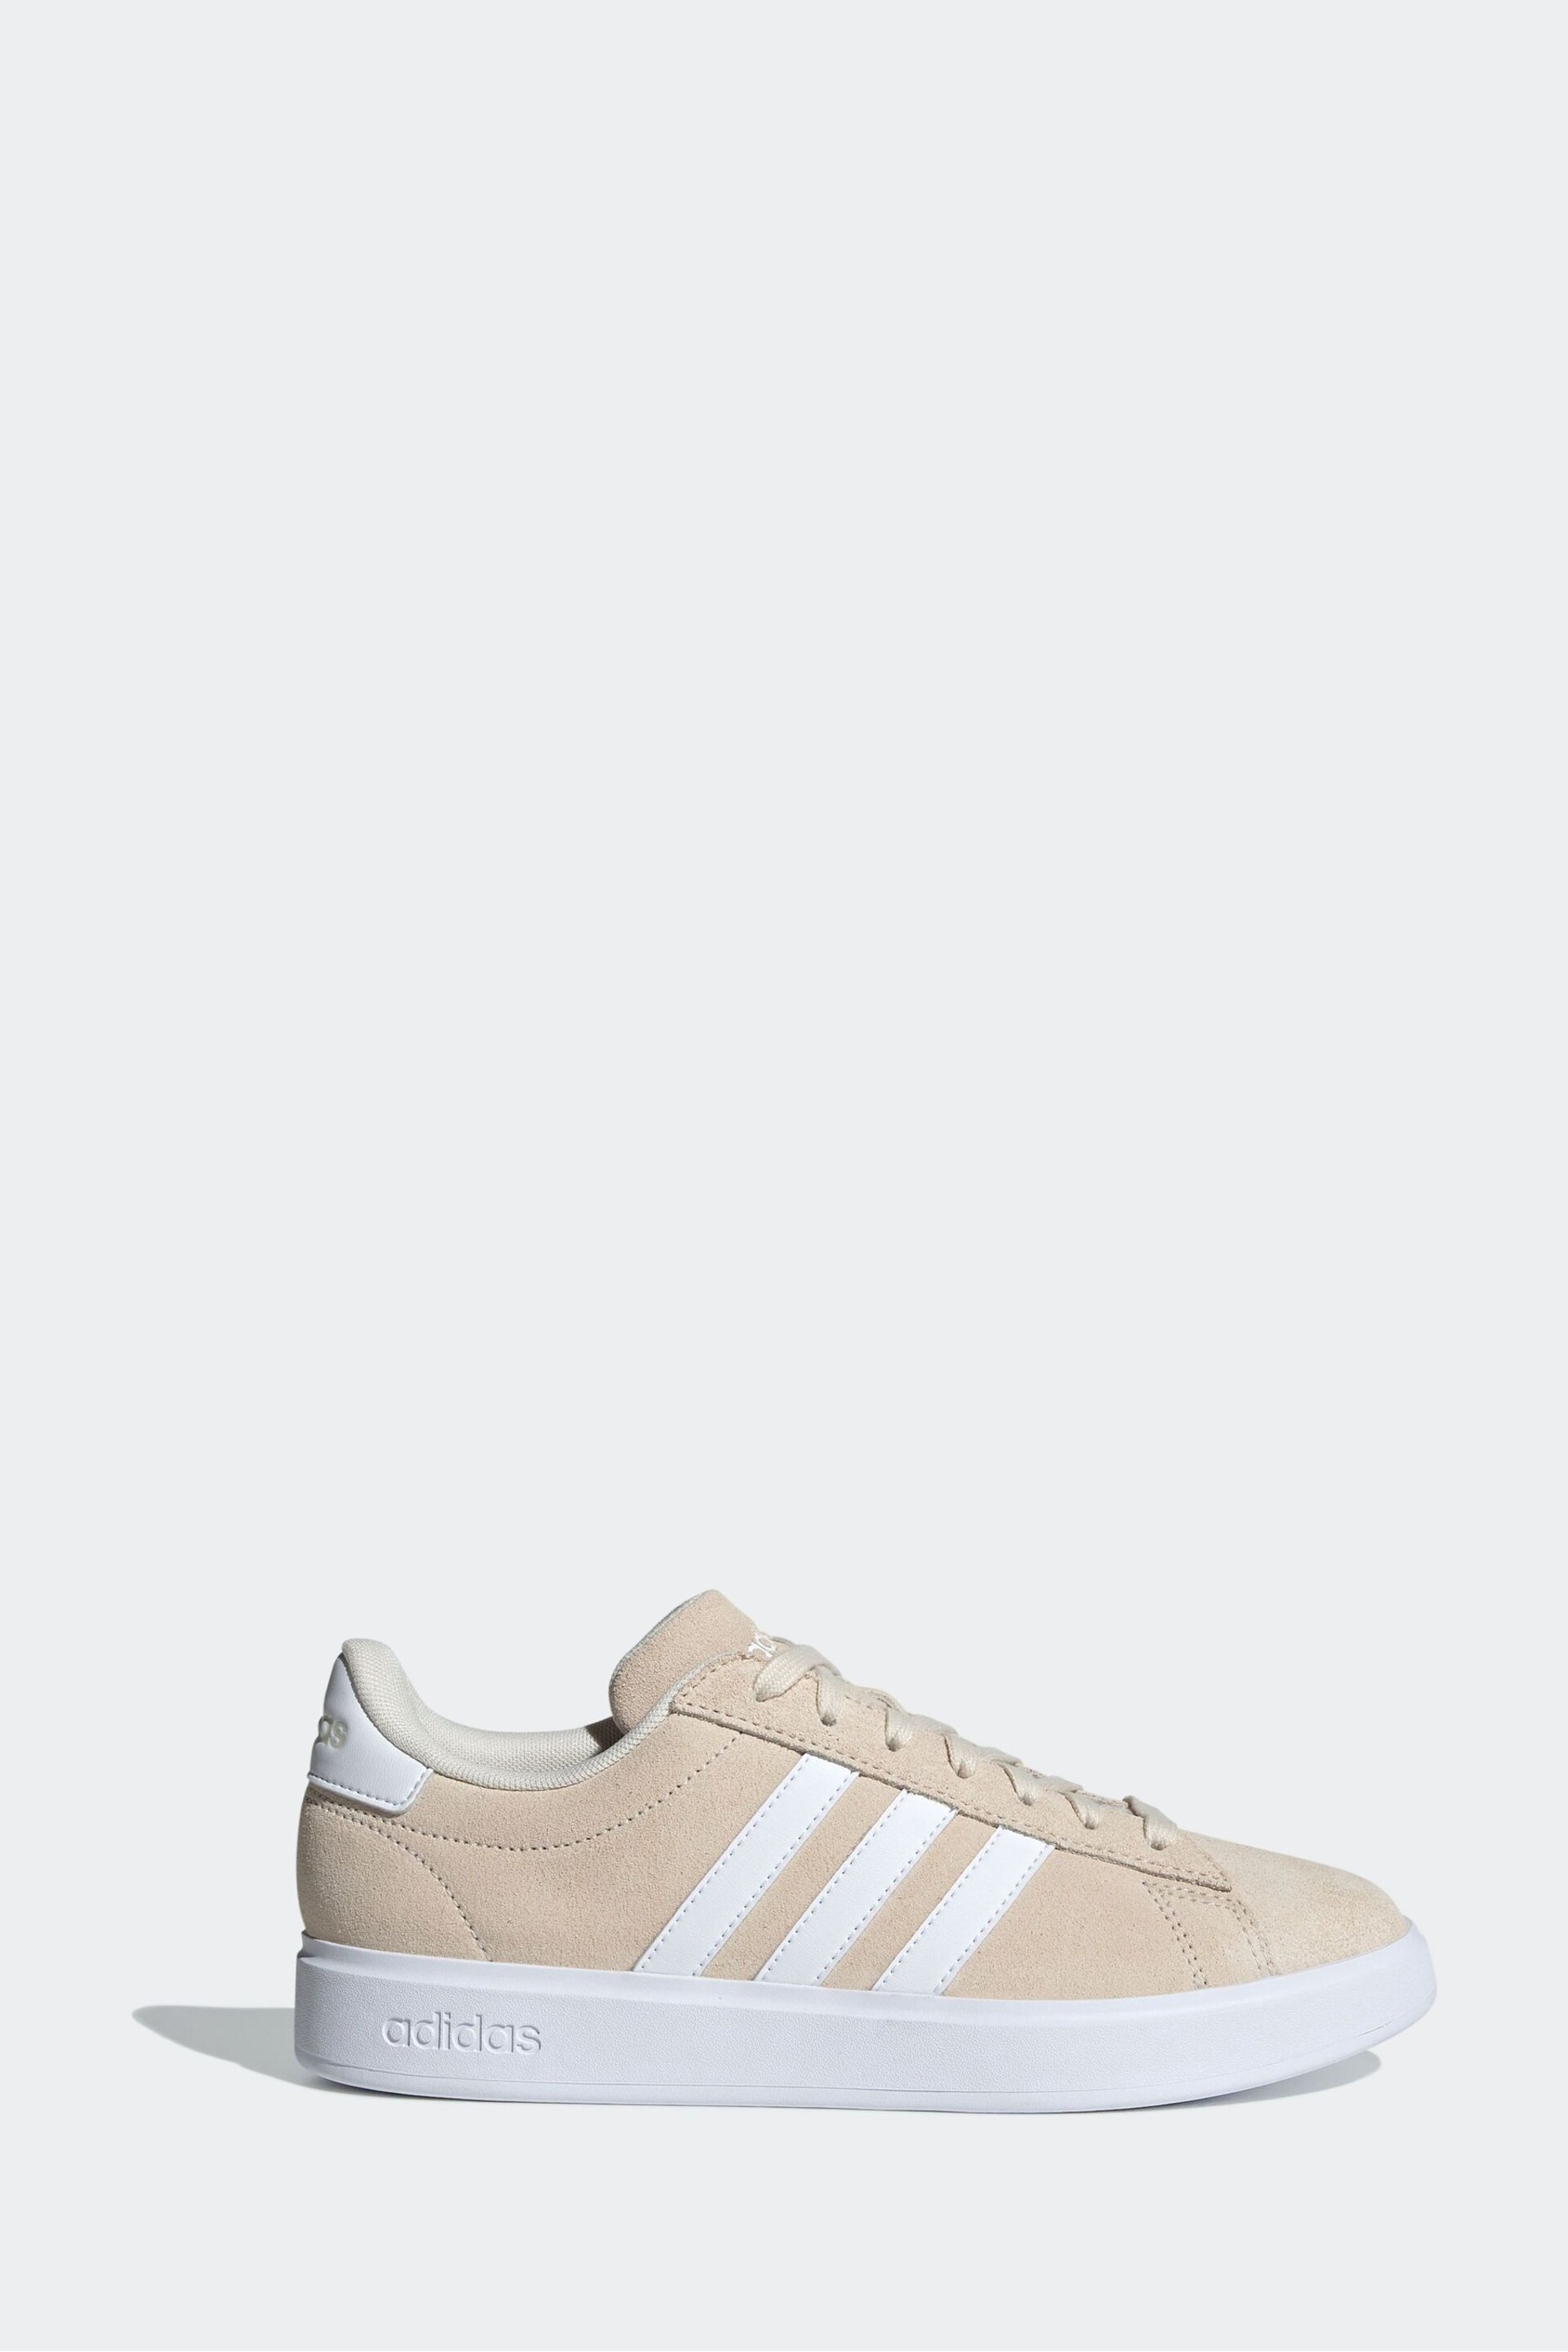 adidas snow white Grand Court 2.0 Trainers - Image 1 of 8